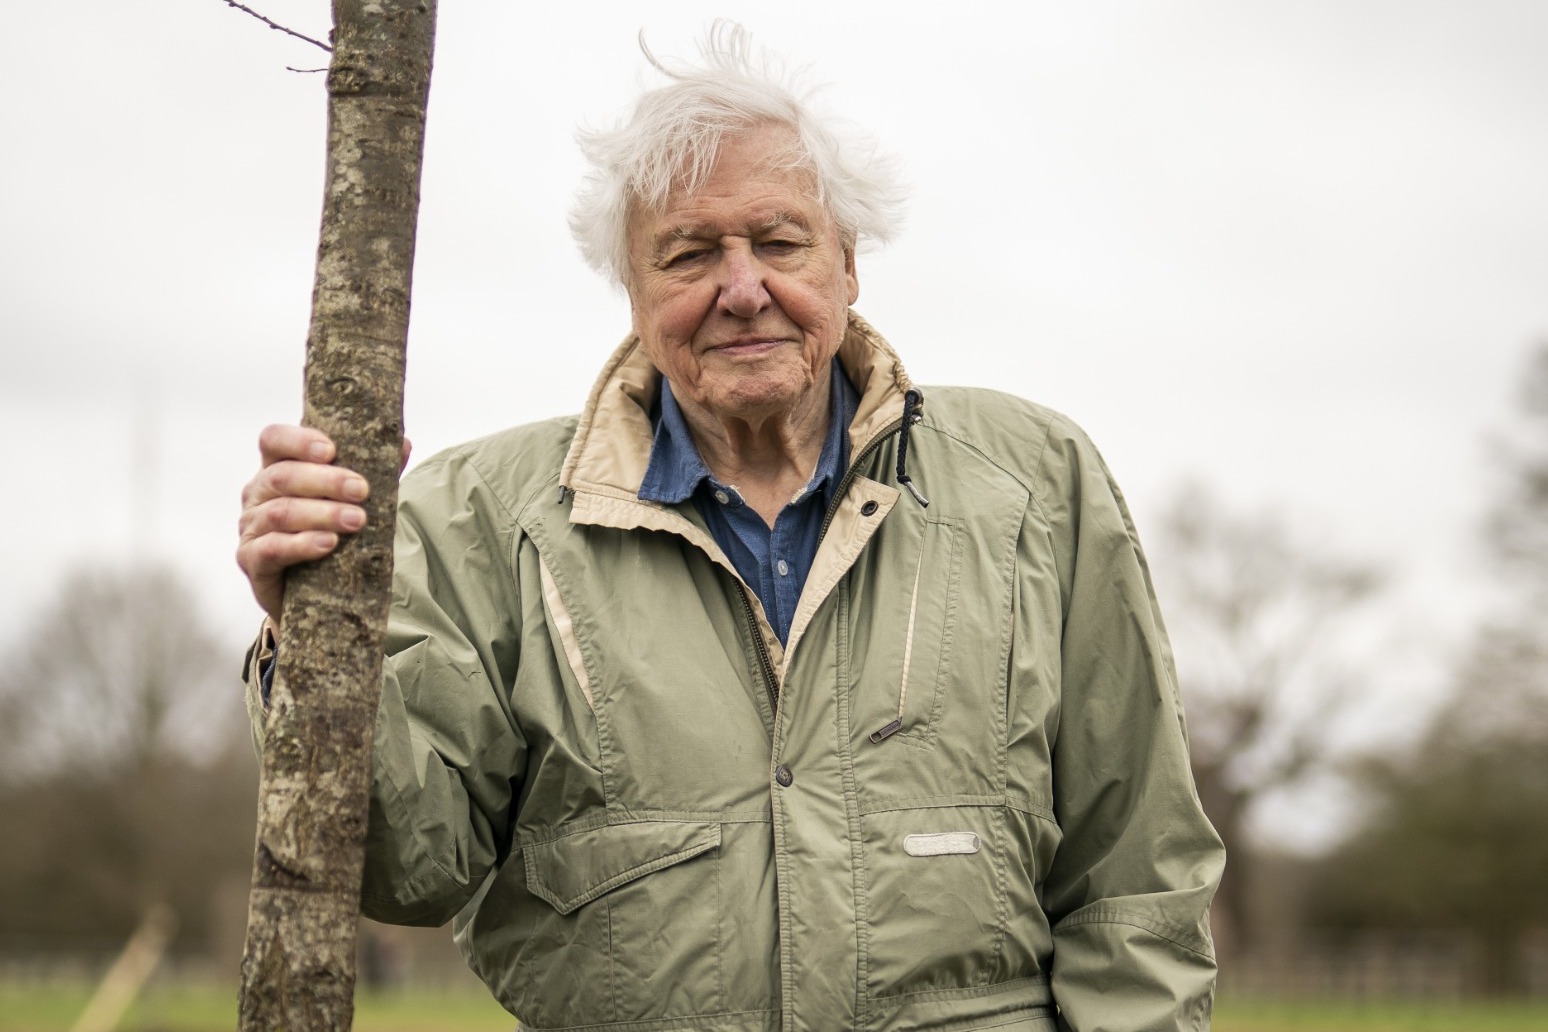 Sir David Attenborough warns we have a few short years left to fix natural world 